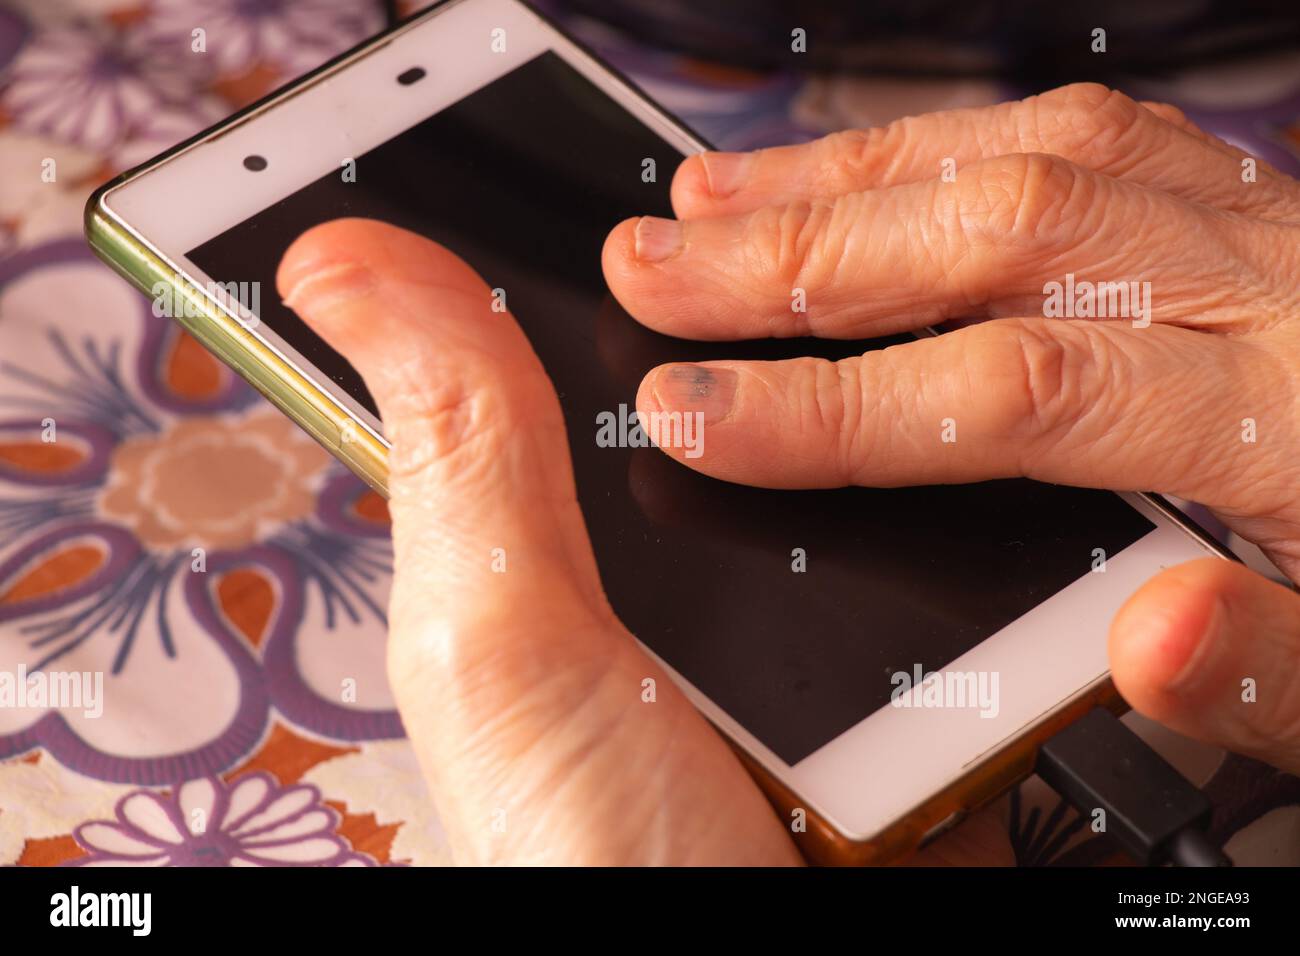 elderly woman holding a phone in her hands while sitting at a table in the kitchen closeup Stock Photo